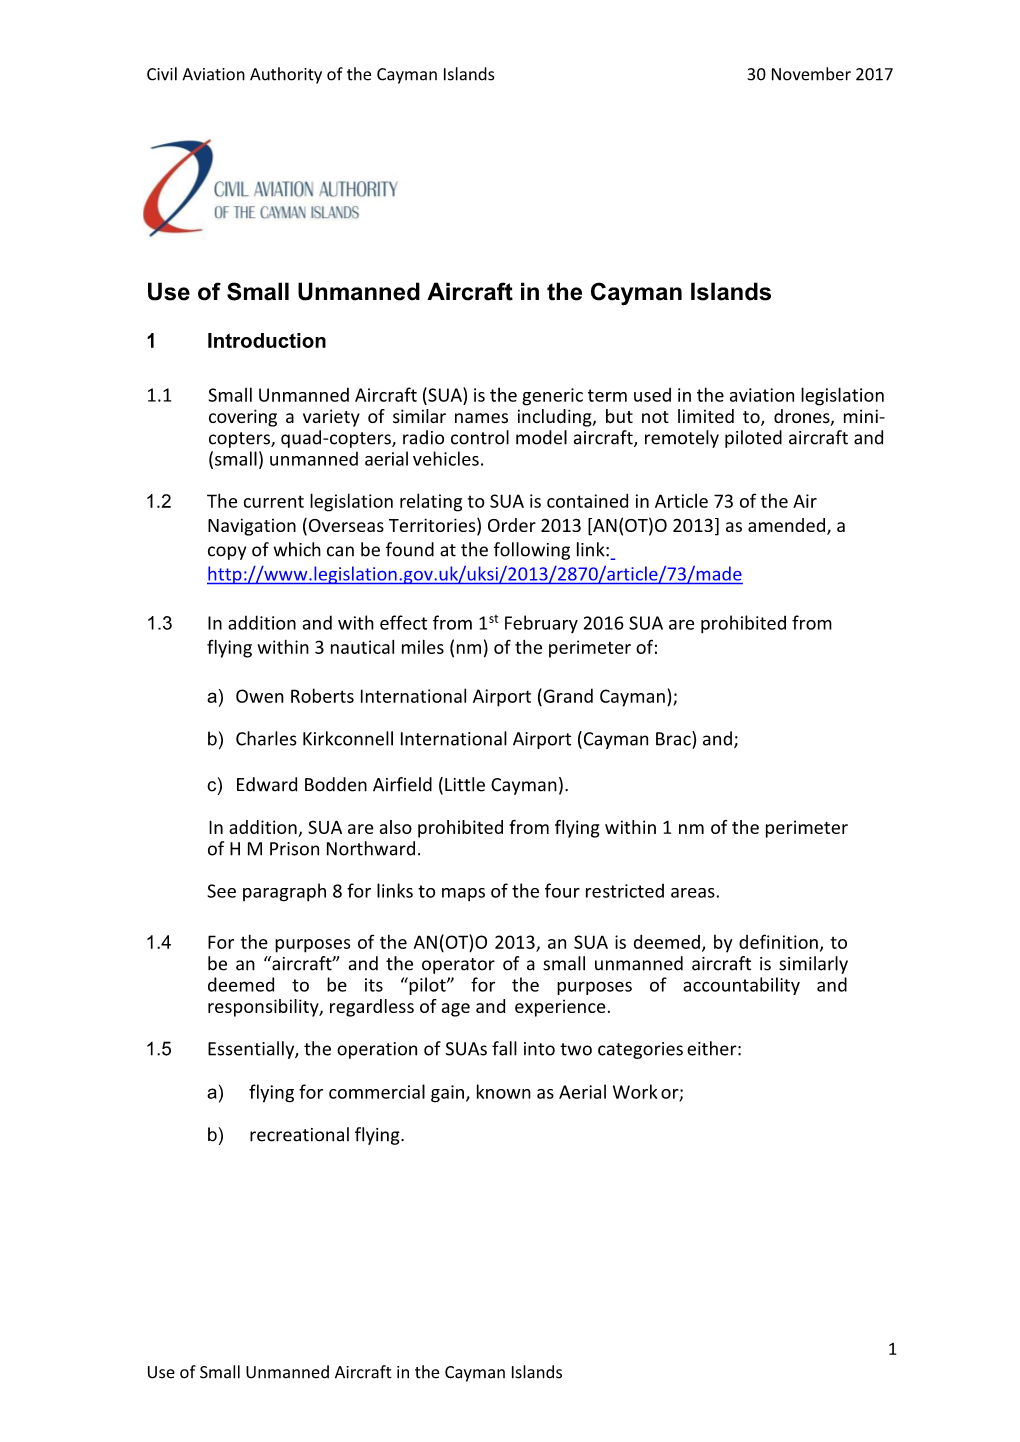 Use of Small Unmanned Aircraft in the Cayman Islands